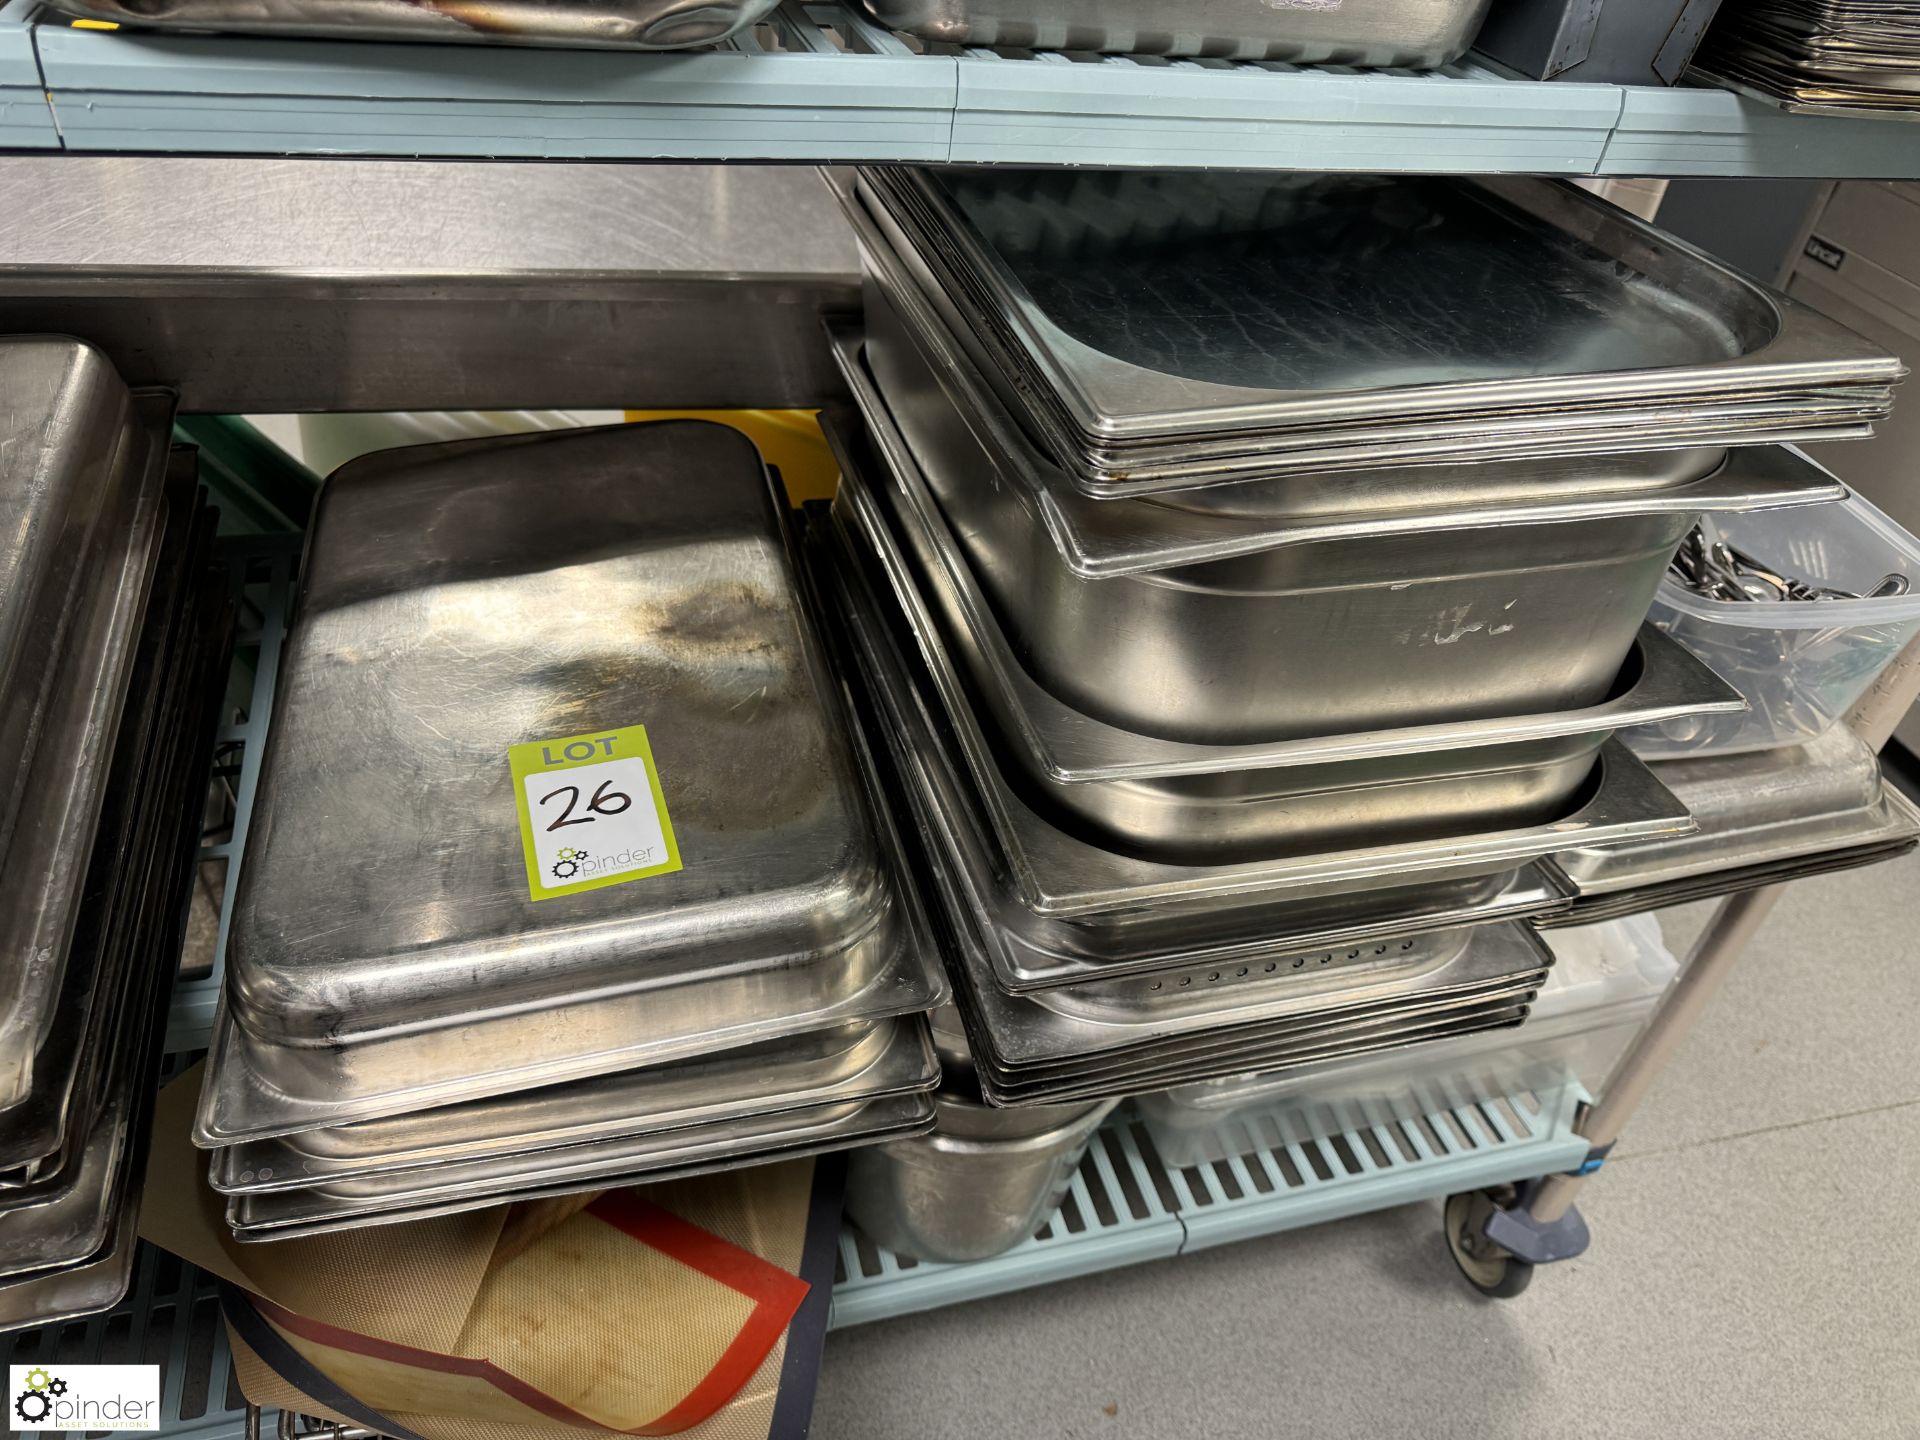 Large quantity Cooking Trays, etc, to rack (rack not included) (location in building – basement - Image 6 of 9